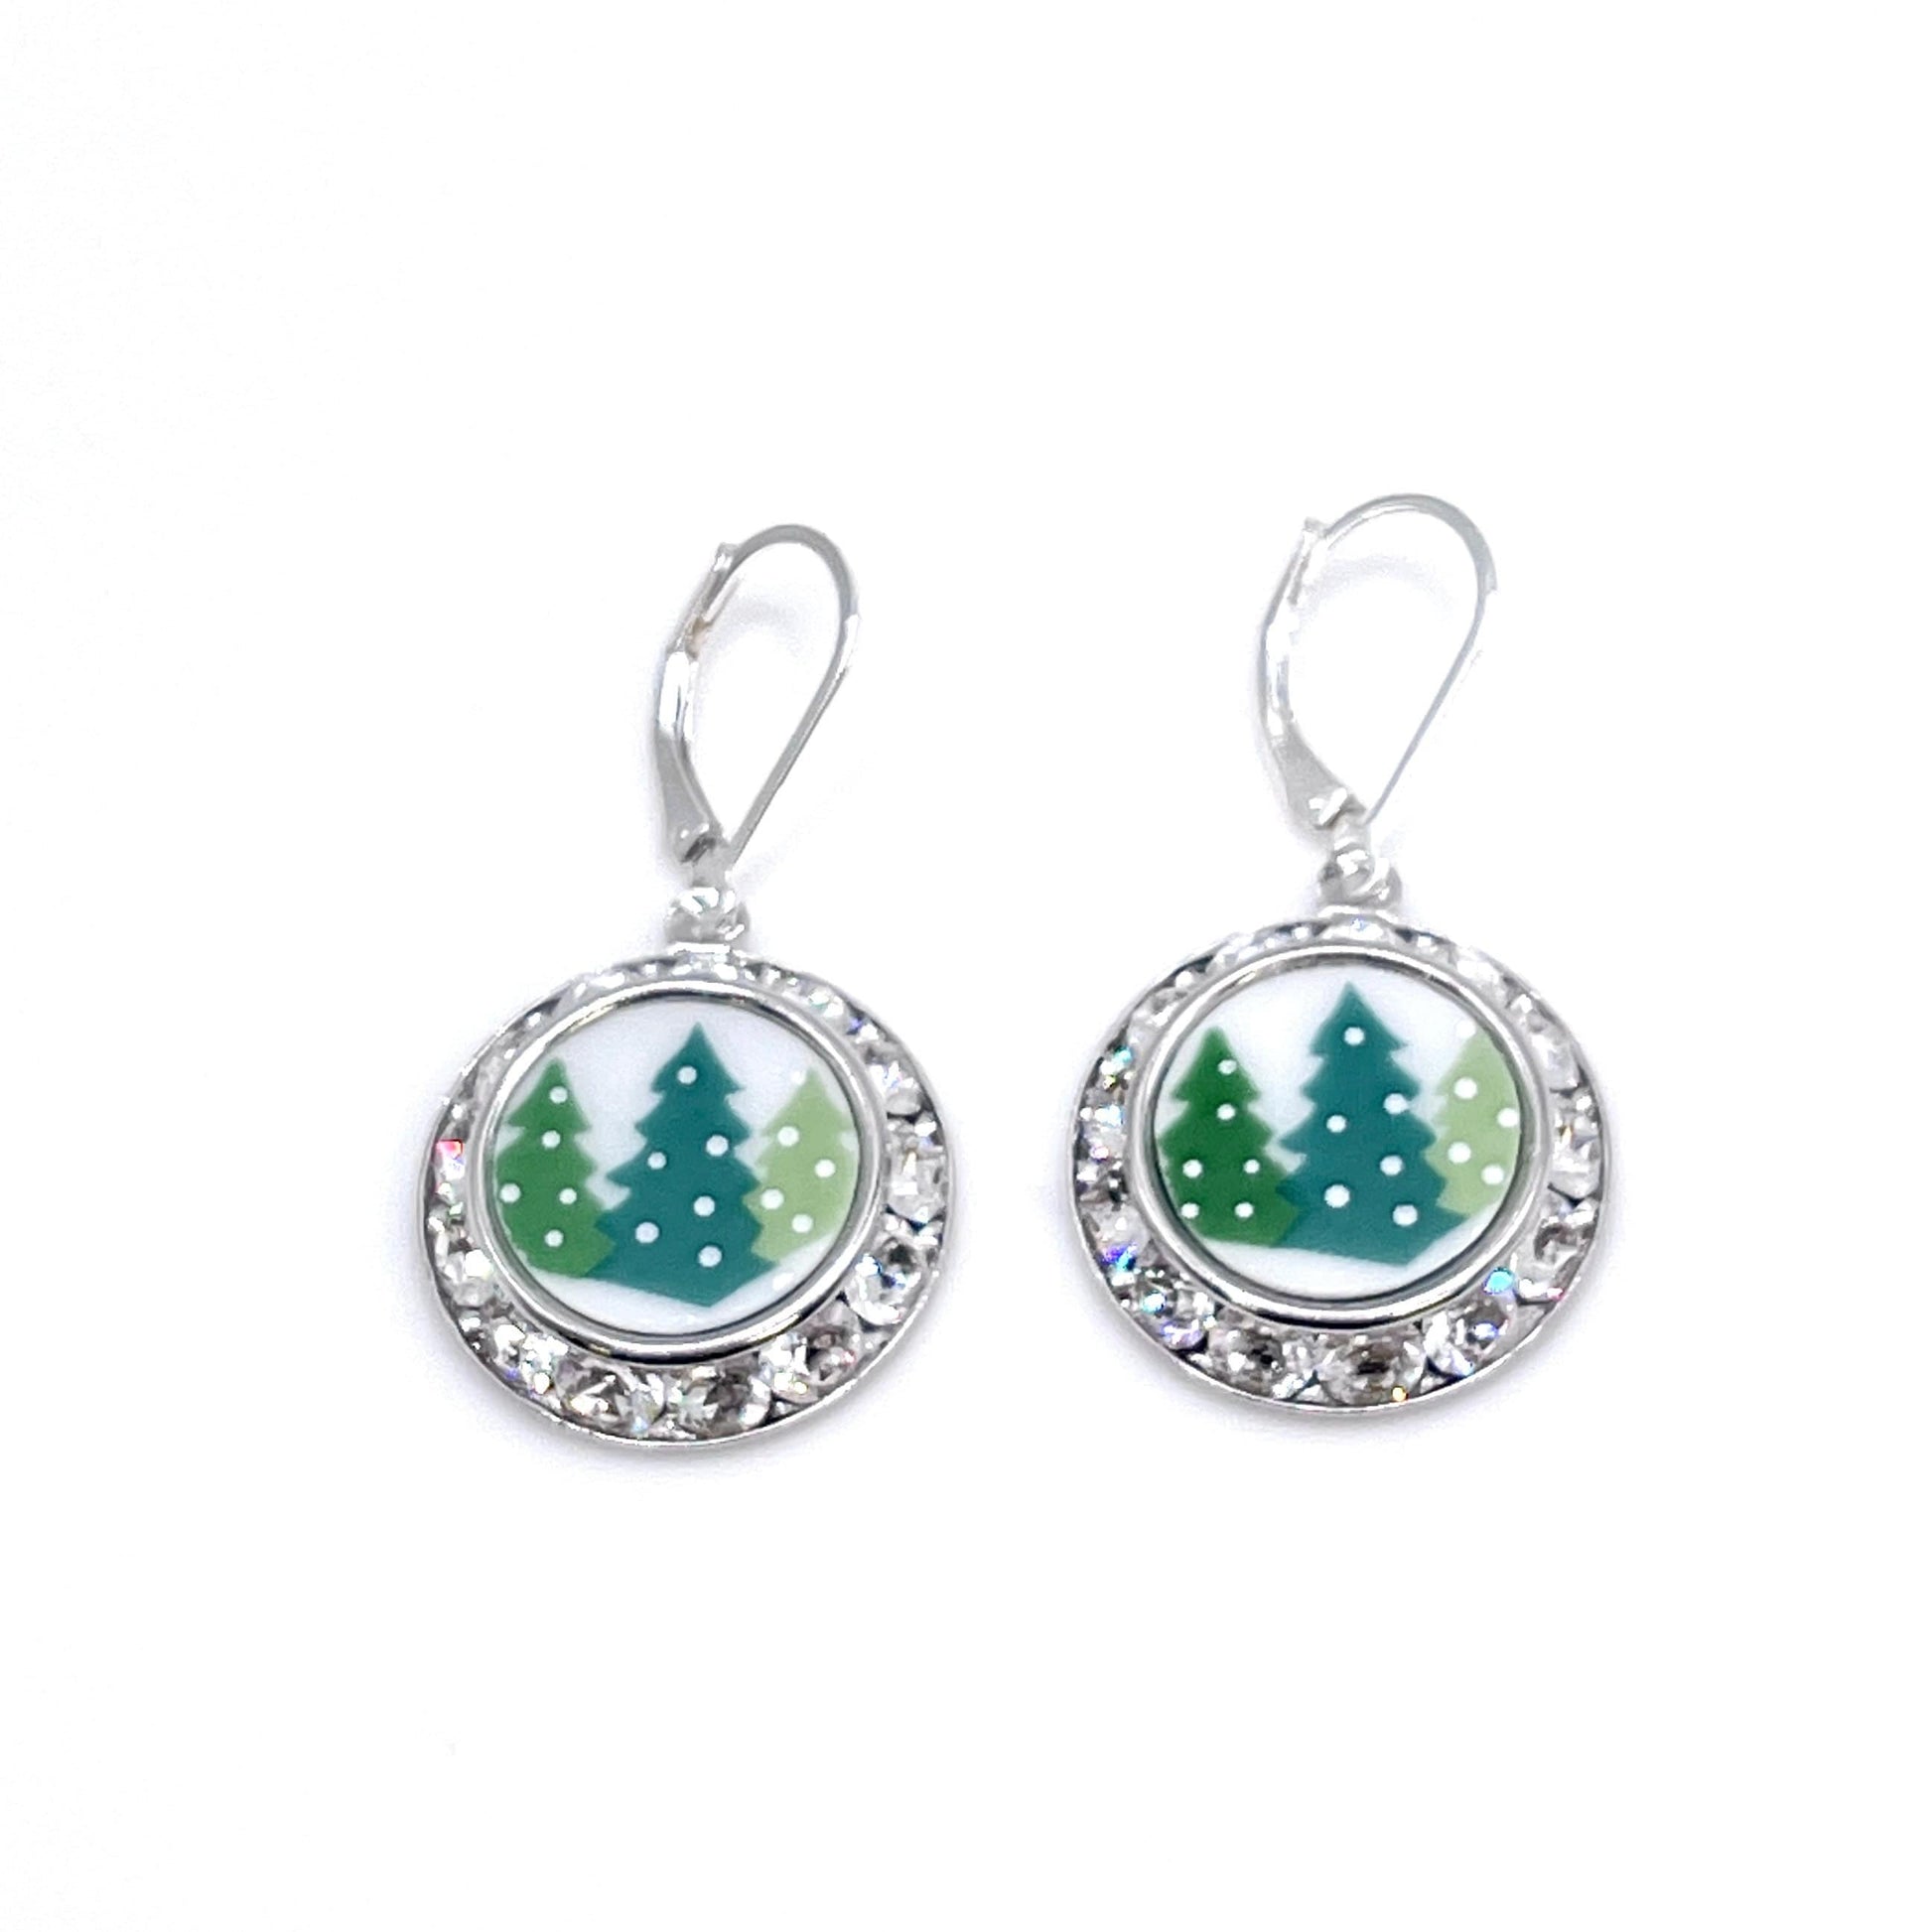 Christmas Tree Crystal Earrings, Vintage Porcelain, Broken China Jewelry Holiday Bling, Christmas Gifts for Women, Stocking Stuffer